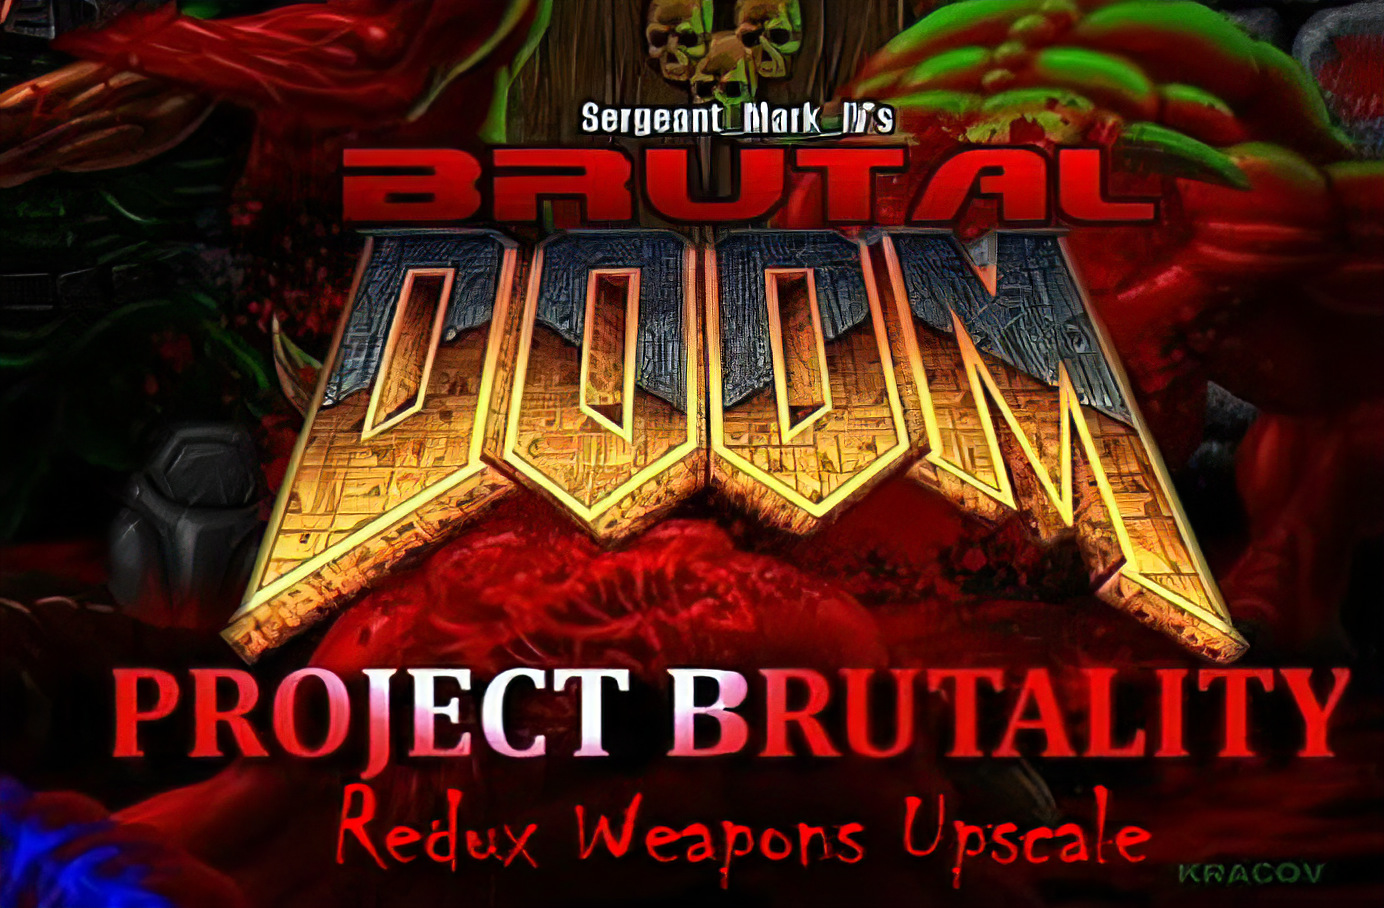 zdl doom launcher with project brutality 3.0